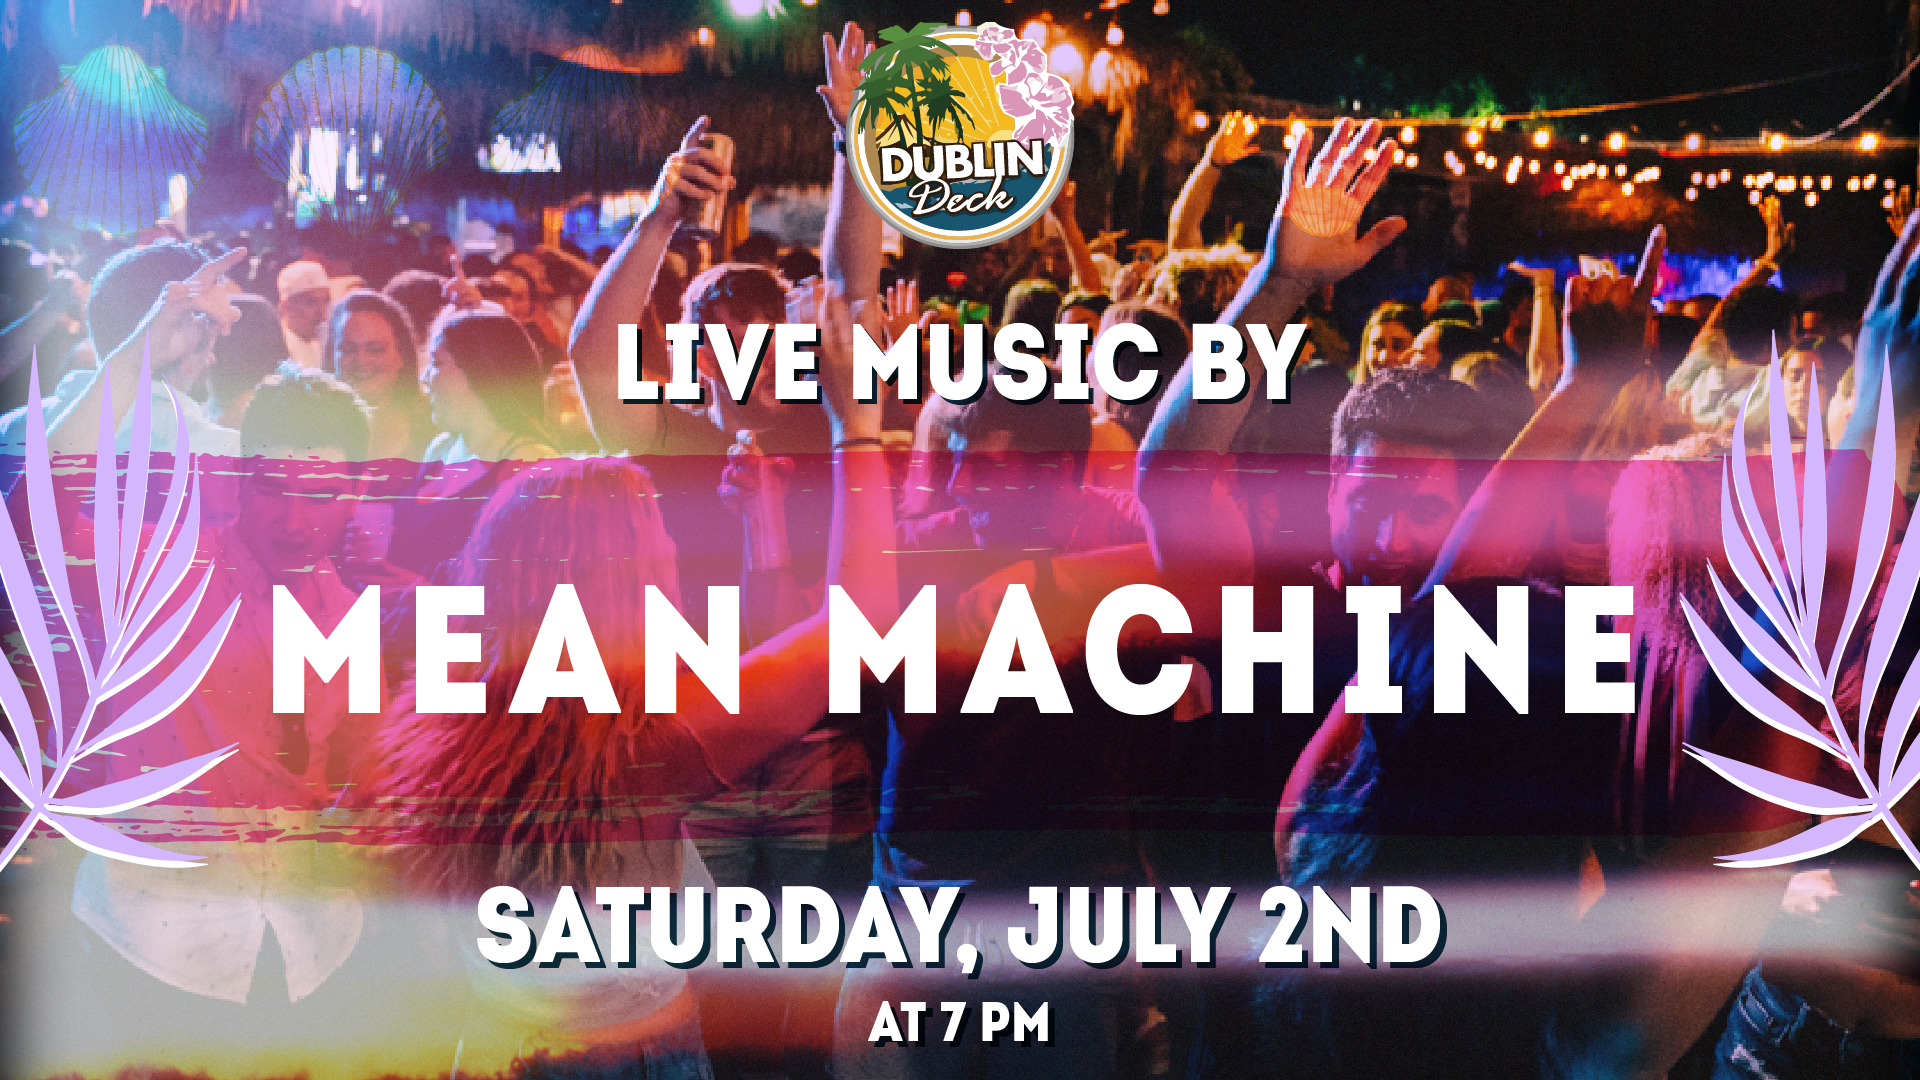 Jam out with Mean Machine at Dublin Deck! Music starts at 7PM